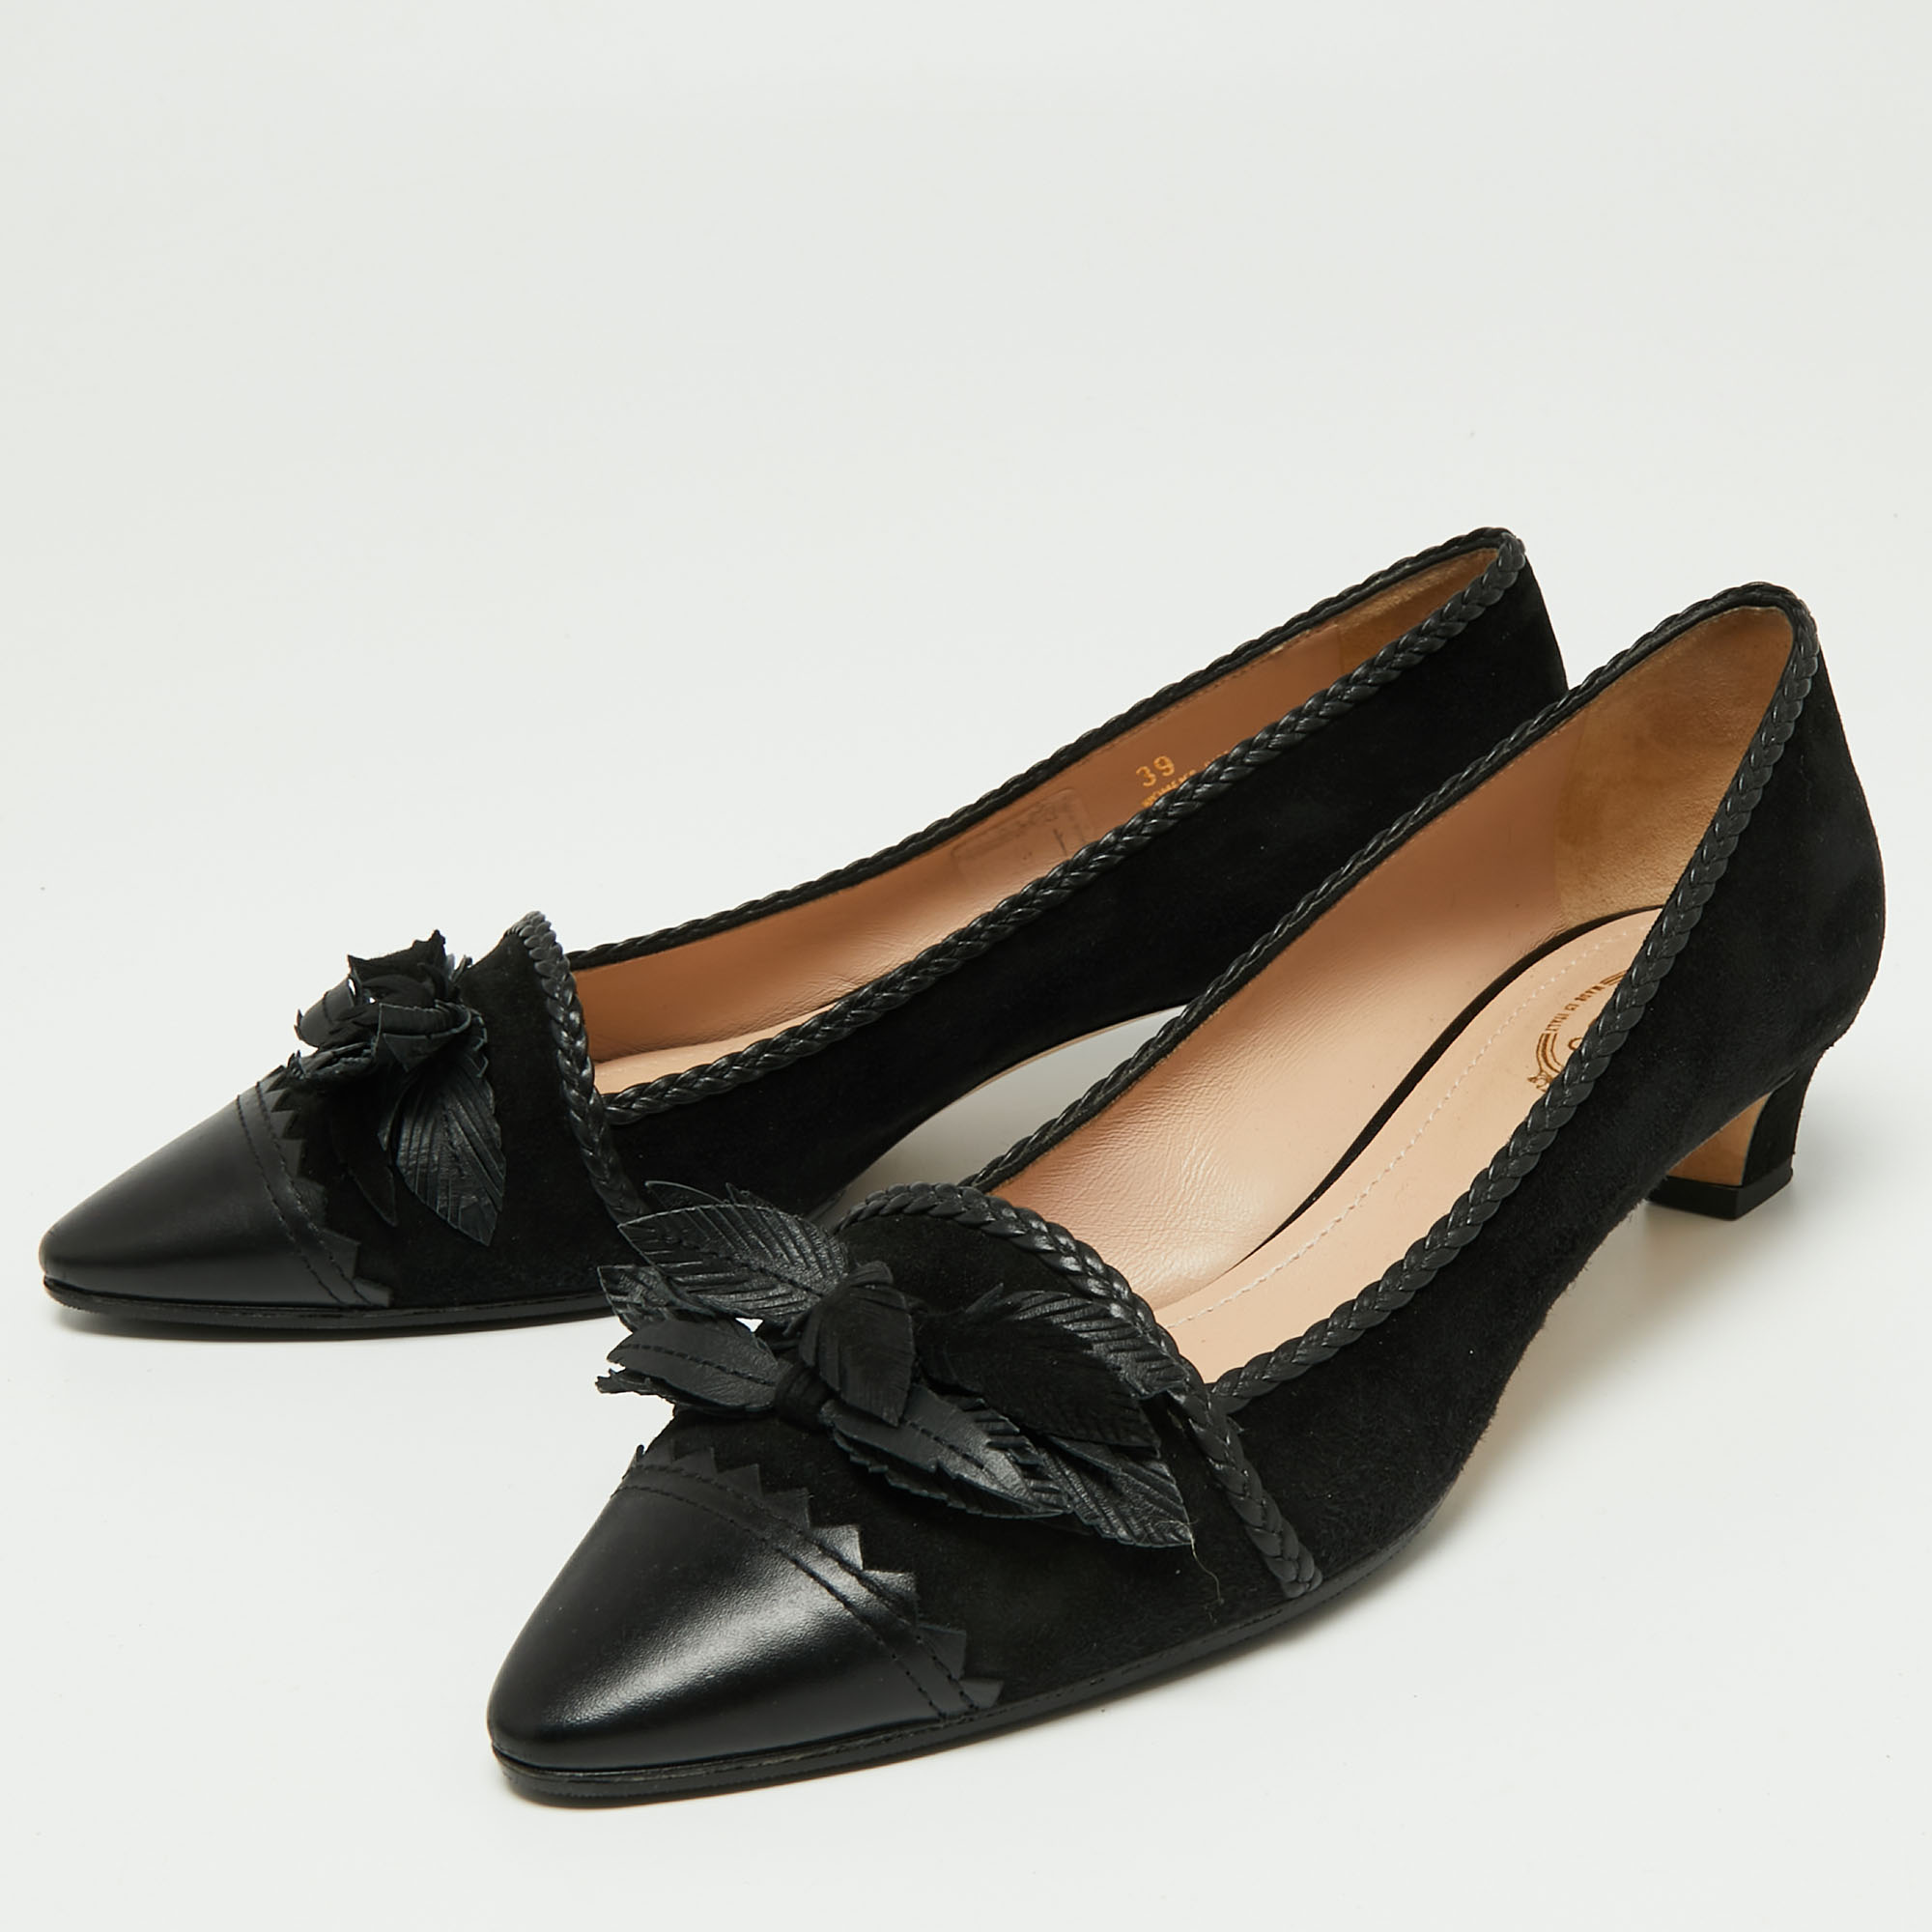 Tod's Black Suede and Leather Leaf Applique Pumps Size 39  - buy with discount